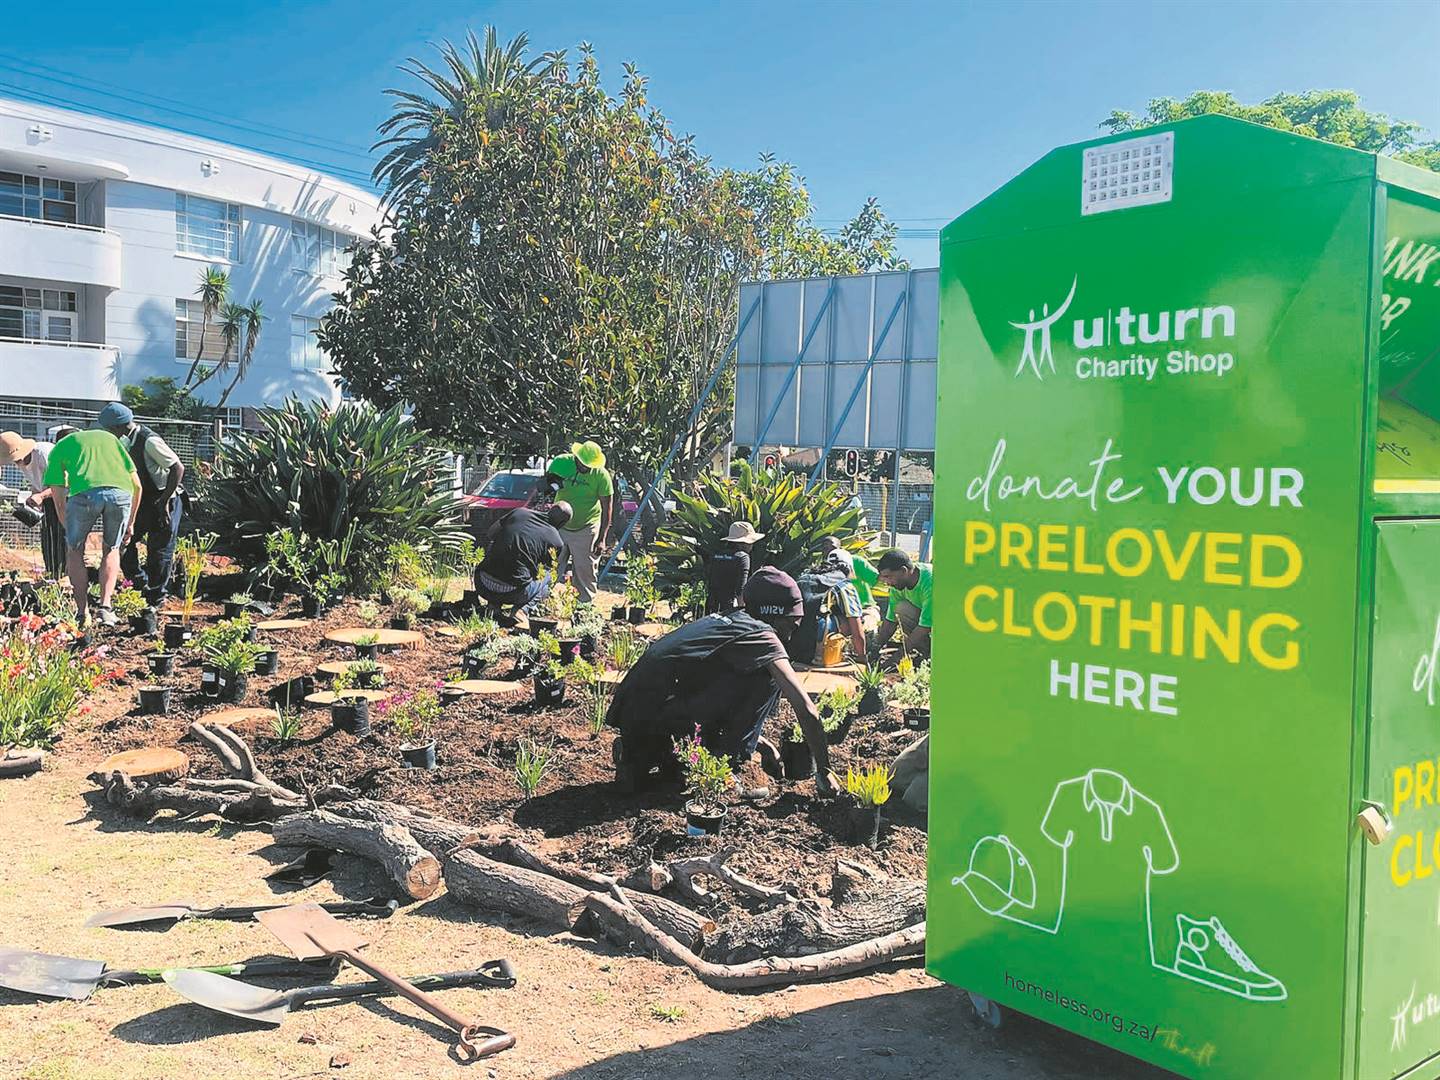 U-turn currently collects clothes using steel bins that will be placed in conspicuous public places for those who would like to donate old and unwanted clothes.PHOTOS: Supplied